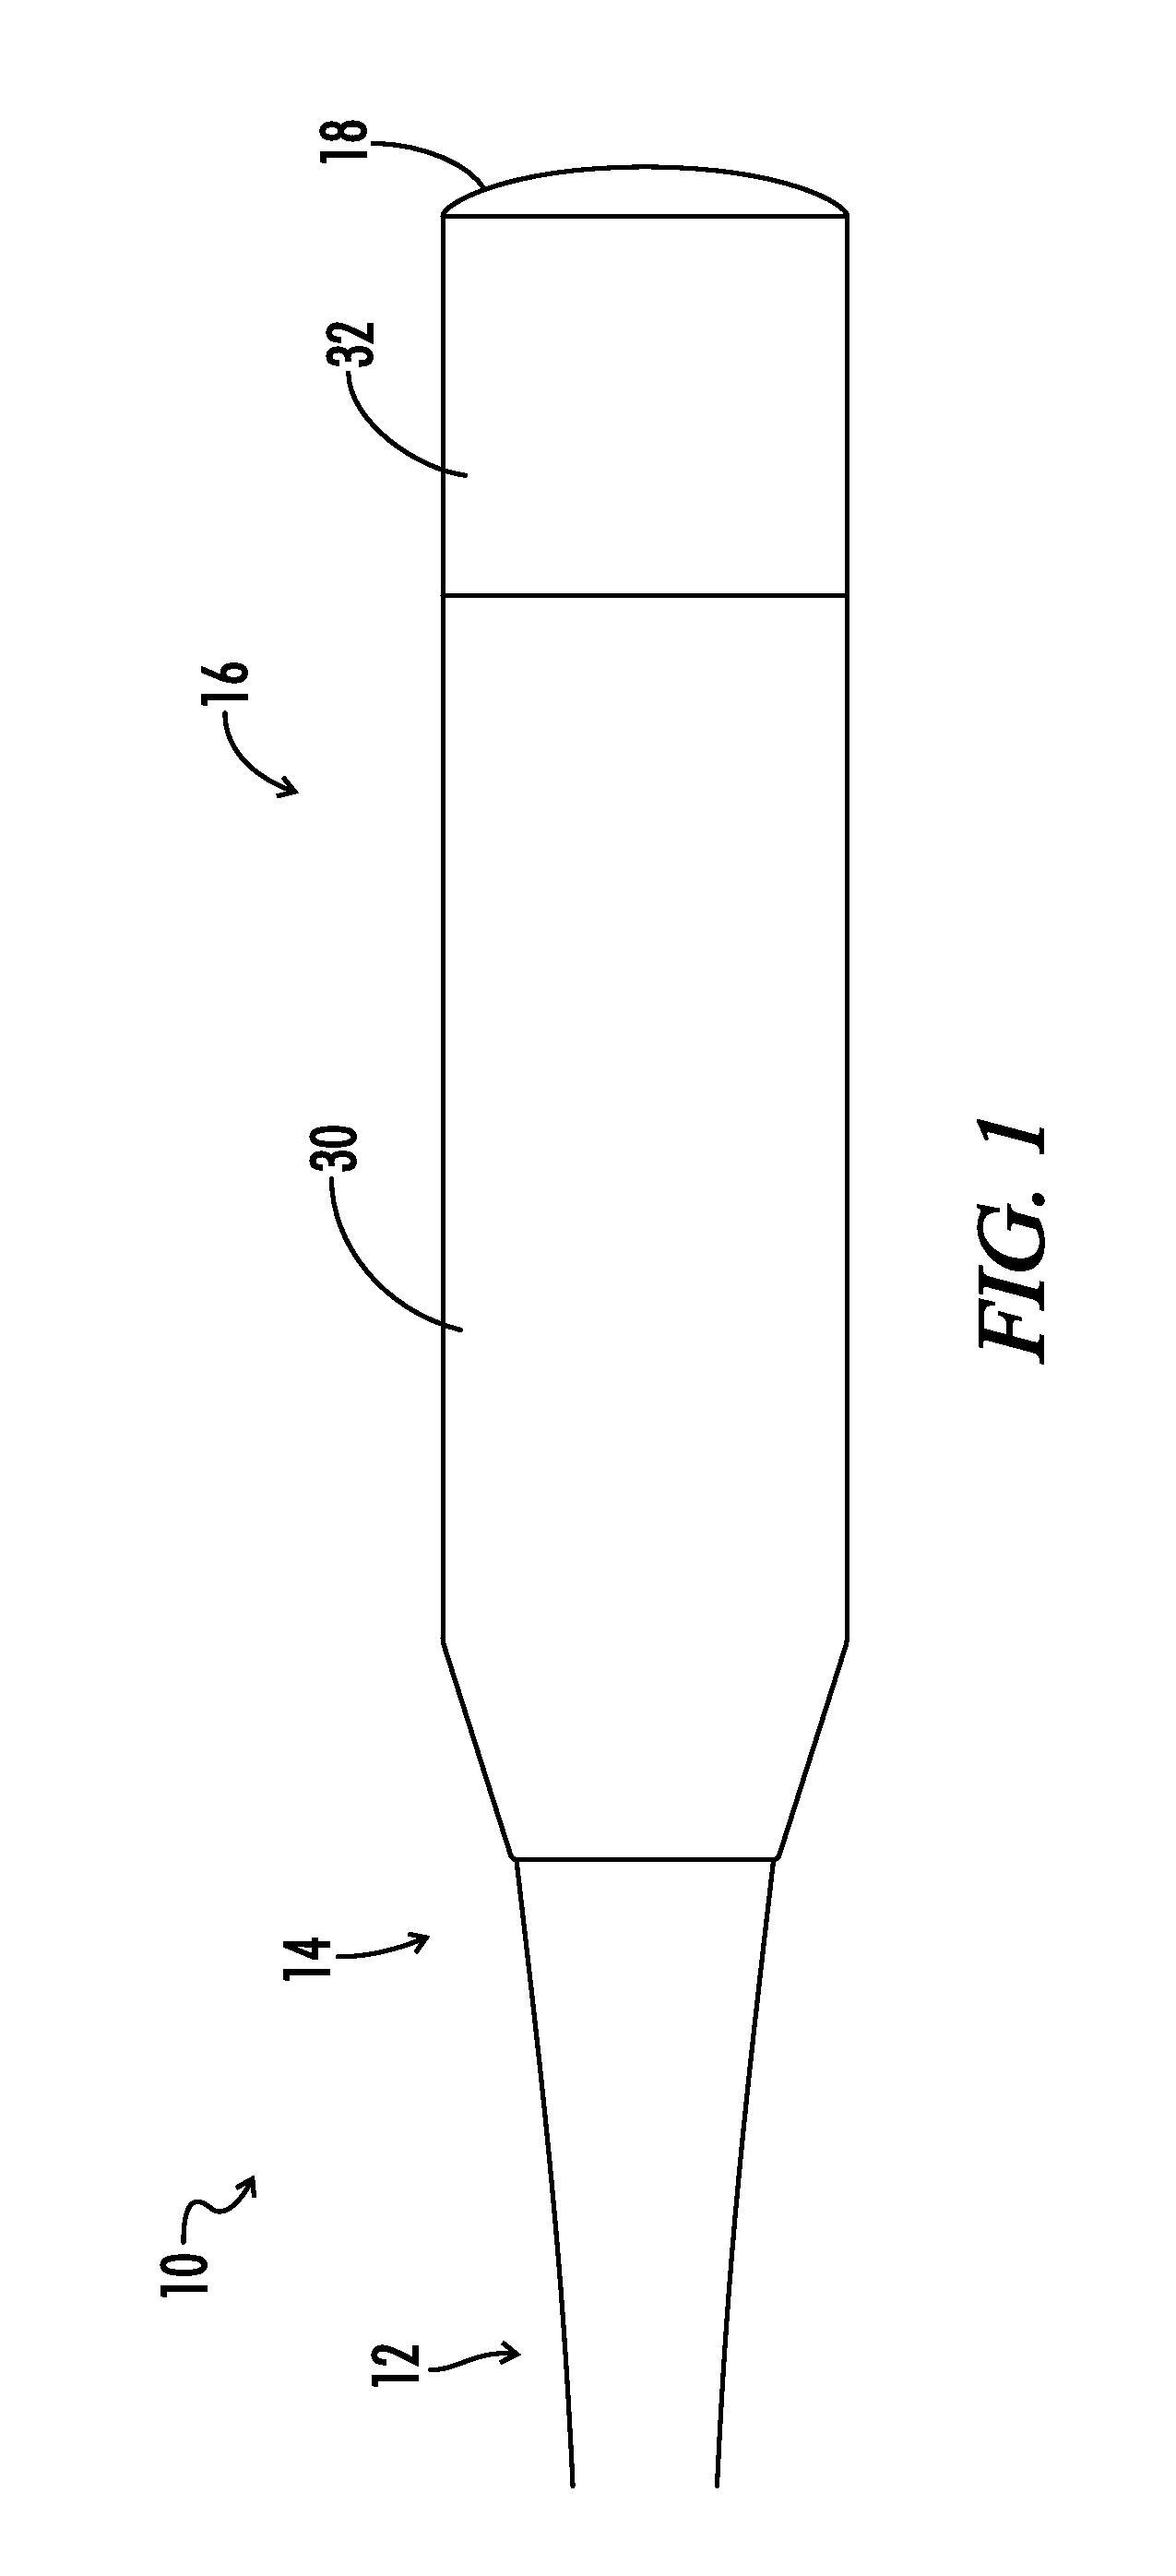 Bat with circumferentially aligned and axially segmented barrel section